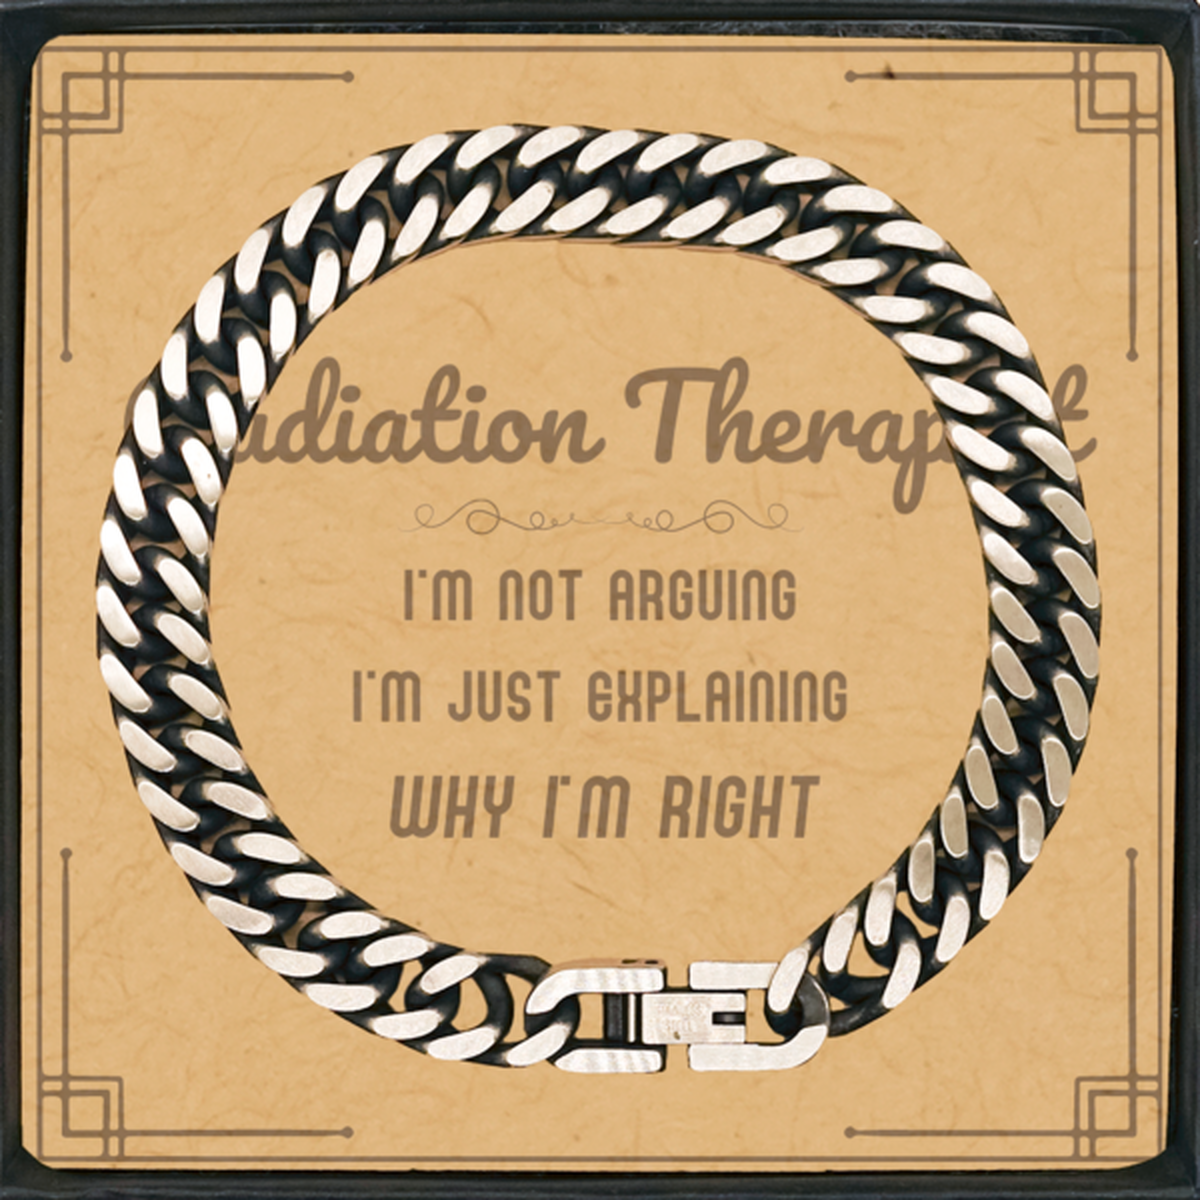 Radiation Therapist I'm not Arguing. I'm Just Explaining Why I'm RIGHT Cuban Link Chain Bracelet, Funny Saying Quote Radiation Therapist Gifts For Radiation Therapist Message Card Graduation Birthday Christmas Gifts for Men Women Coworker